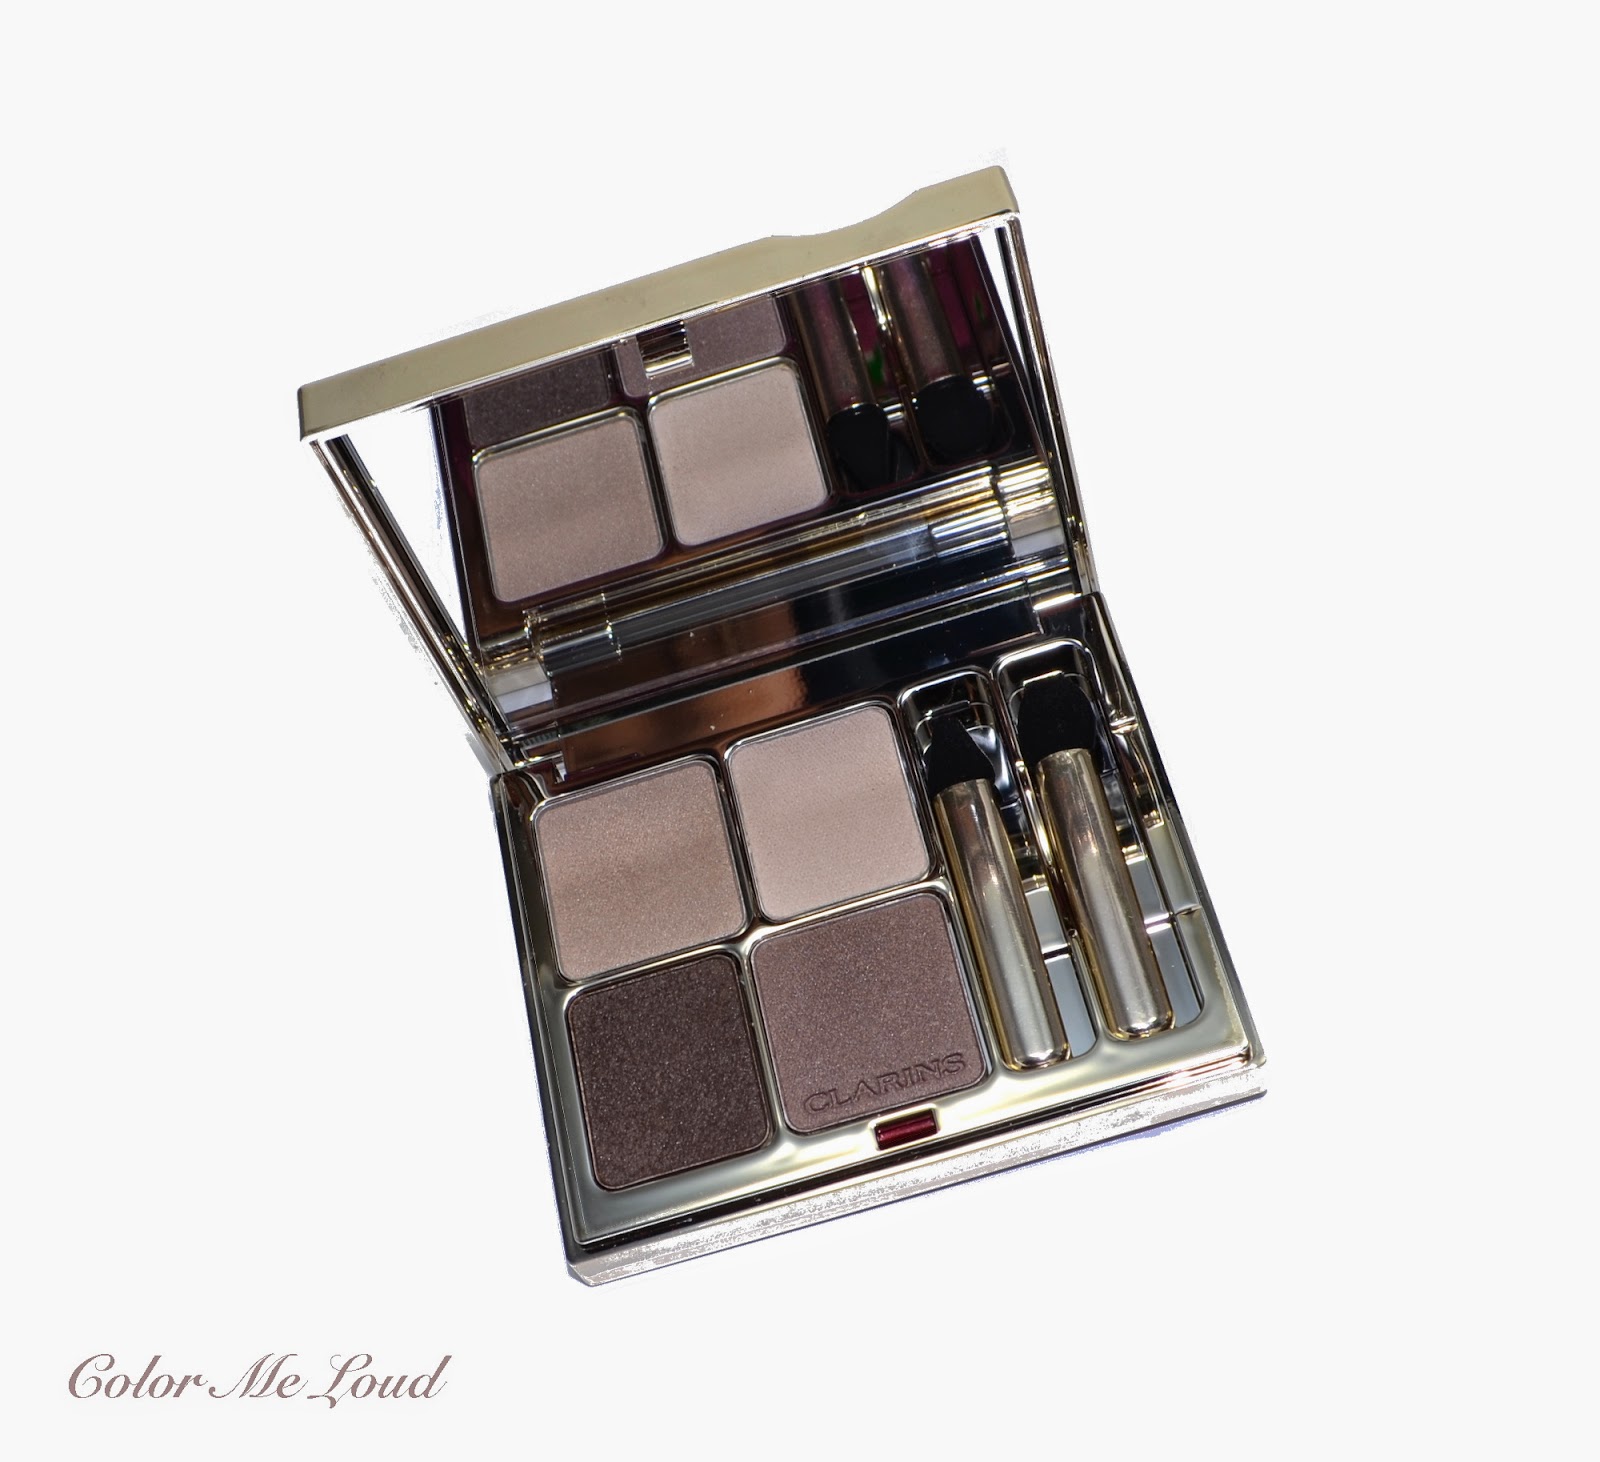 Clarins Eye Quartet Mineral Palette in No. 13 Skin Tones for Fall 2014 Ladylike Collection, Swatch, Review & FOTD